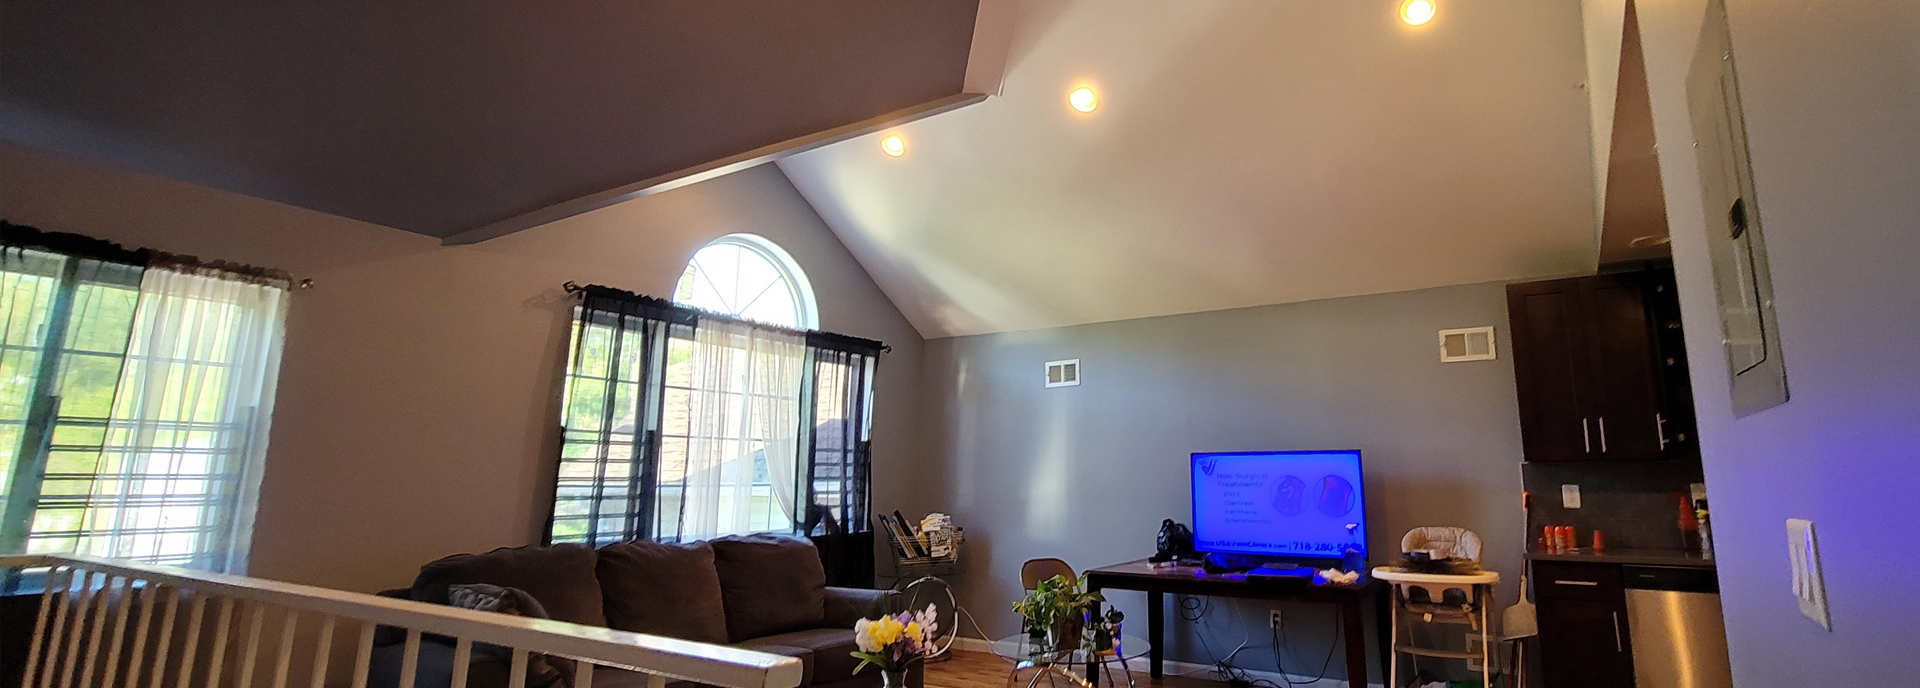 Staten Island, NY Living Room Interior Painting After